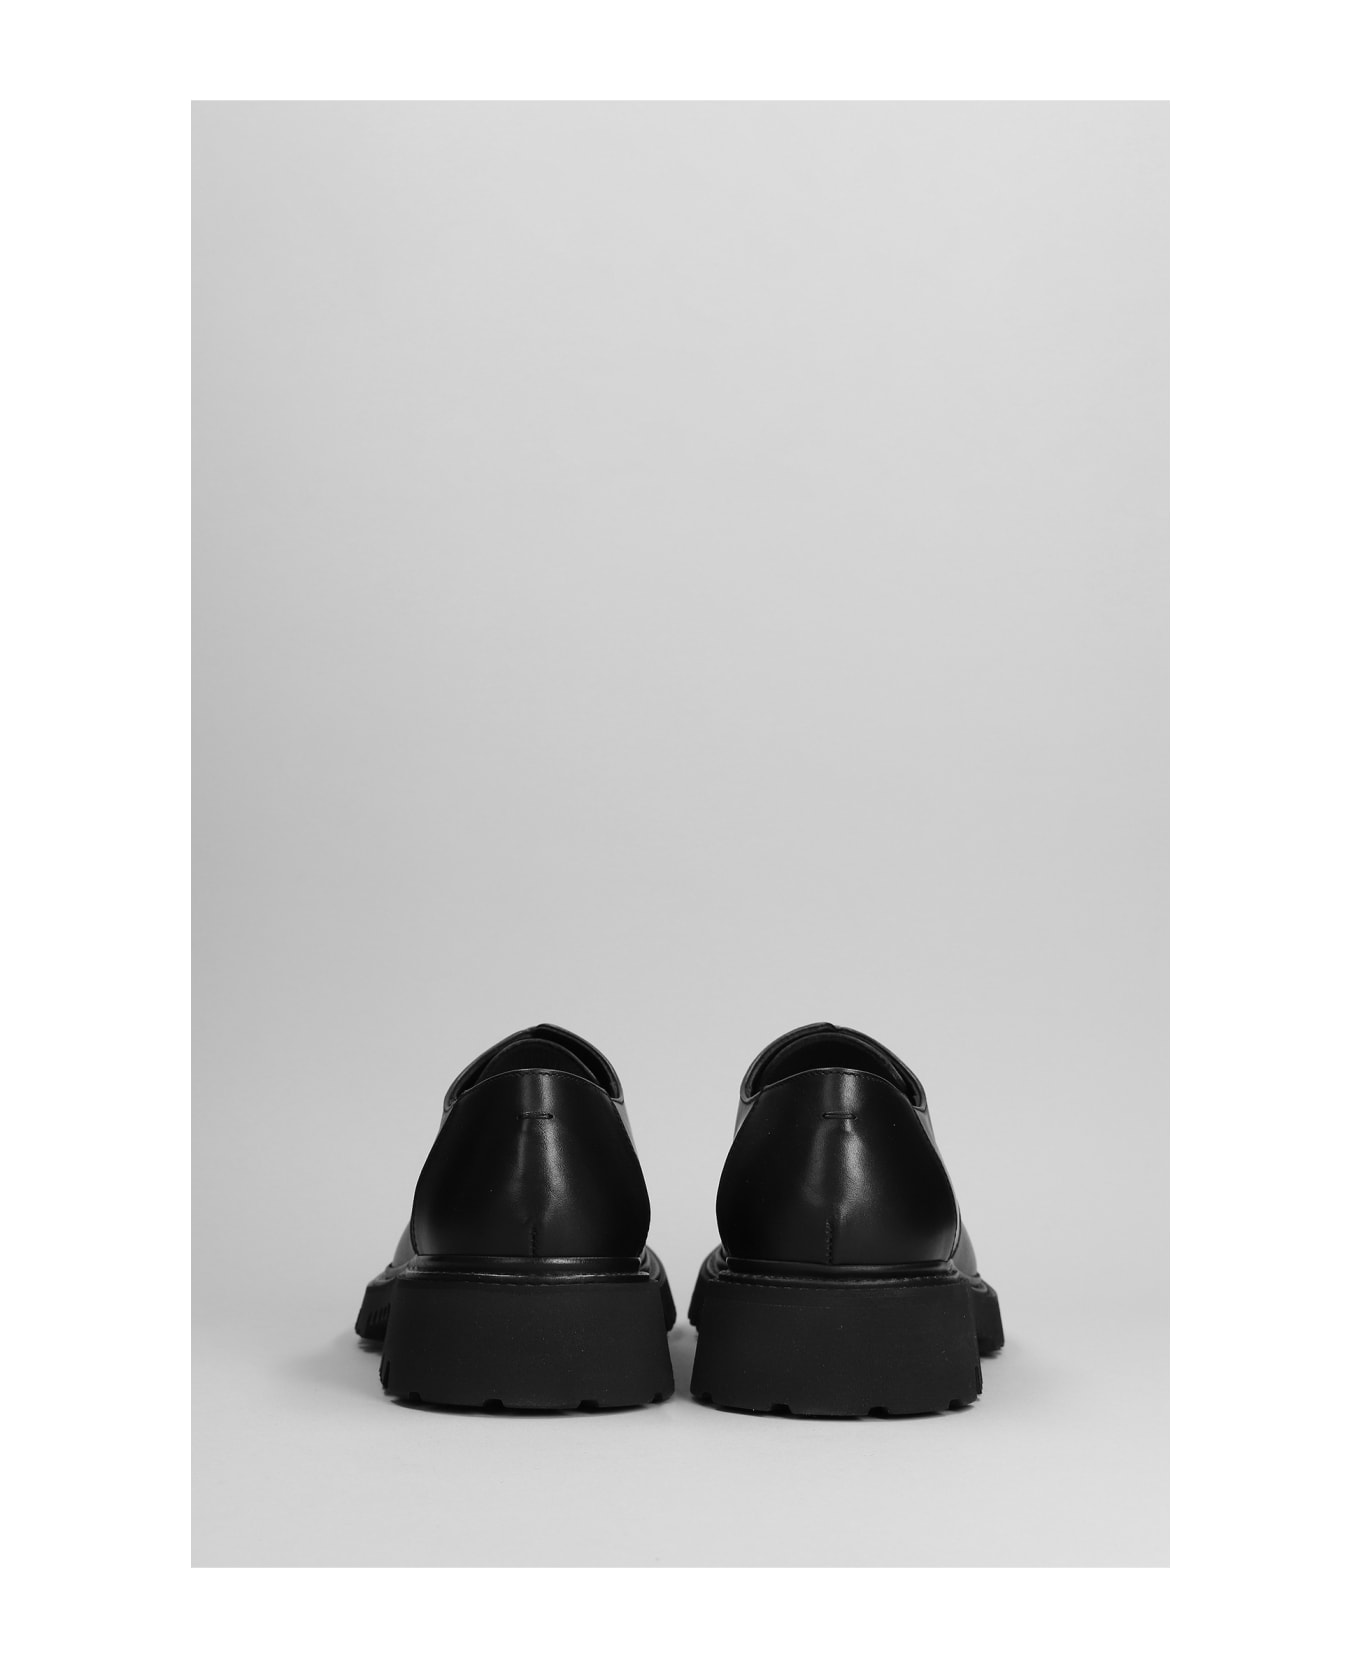 Neil Barrett Lace Up Shoes In Black Leather - black